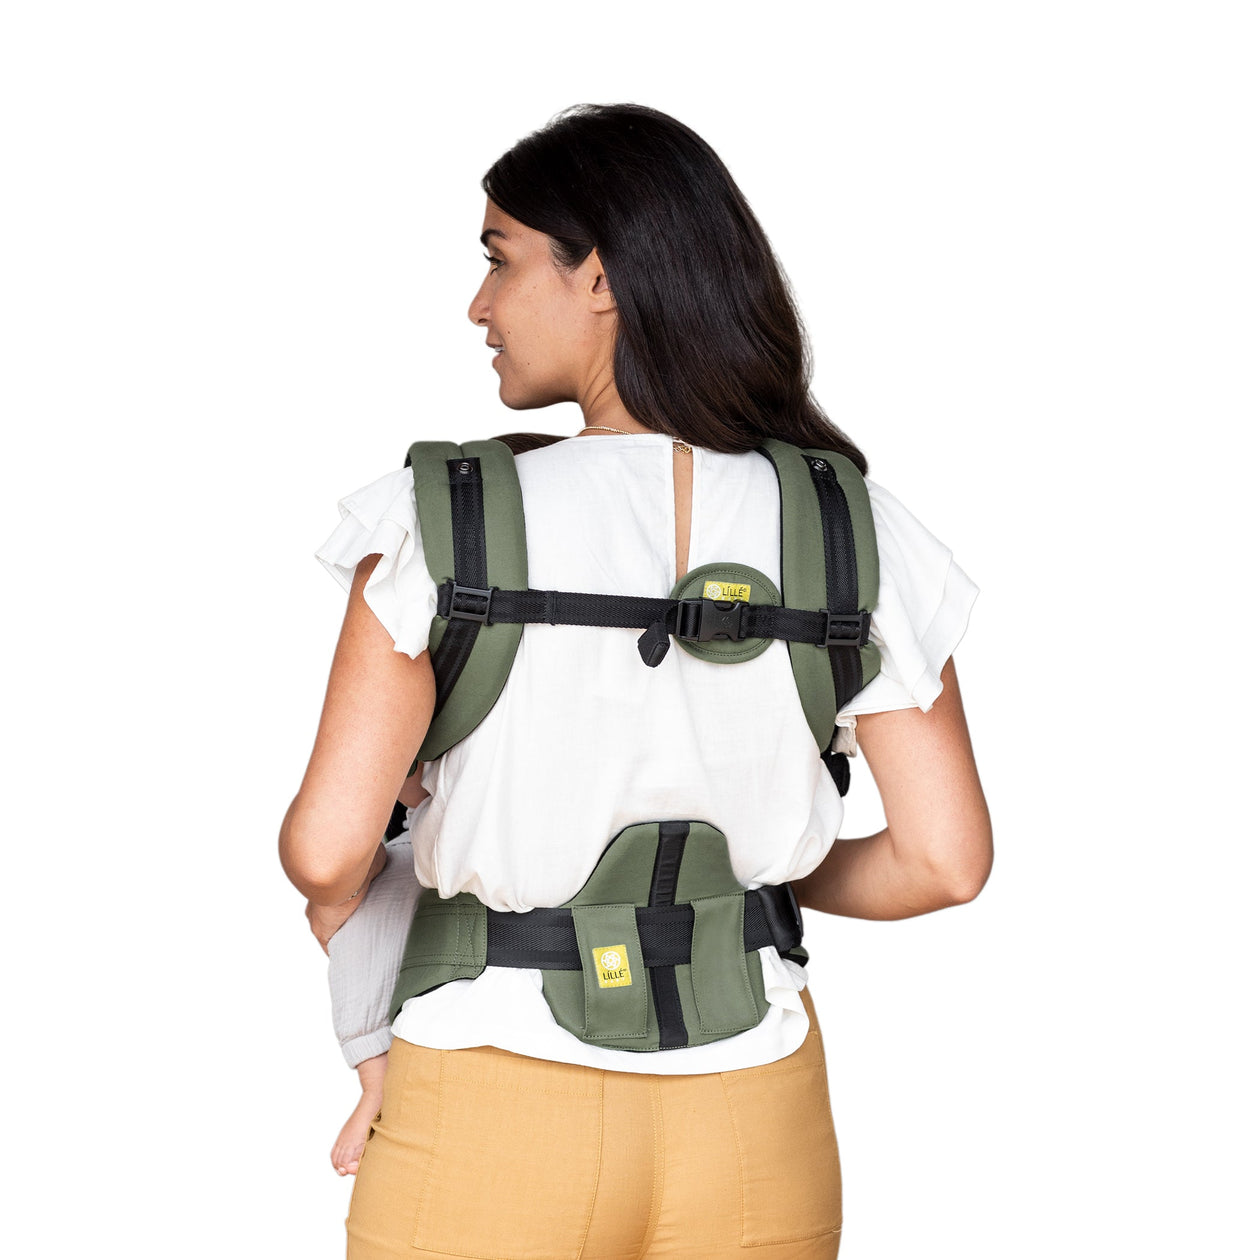 back image of mom wearing baby in lillebaby complete airflow dlx baby carrier in olive black